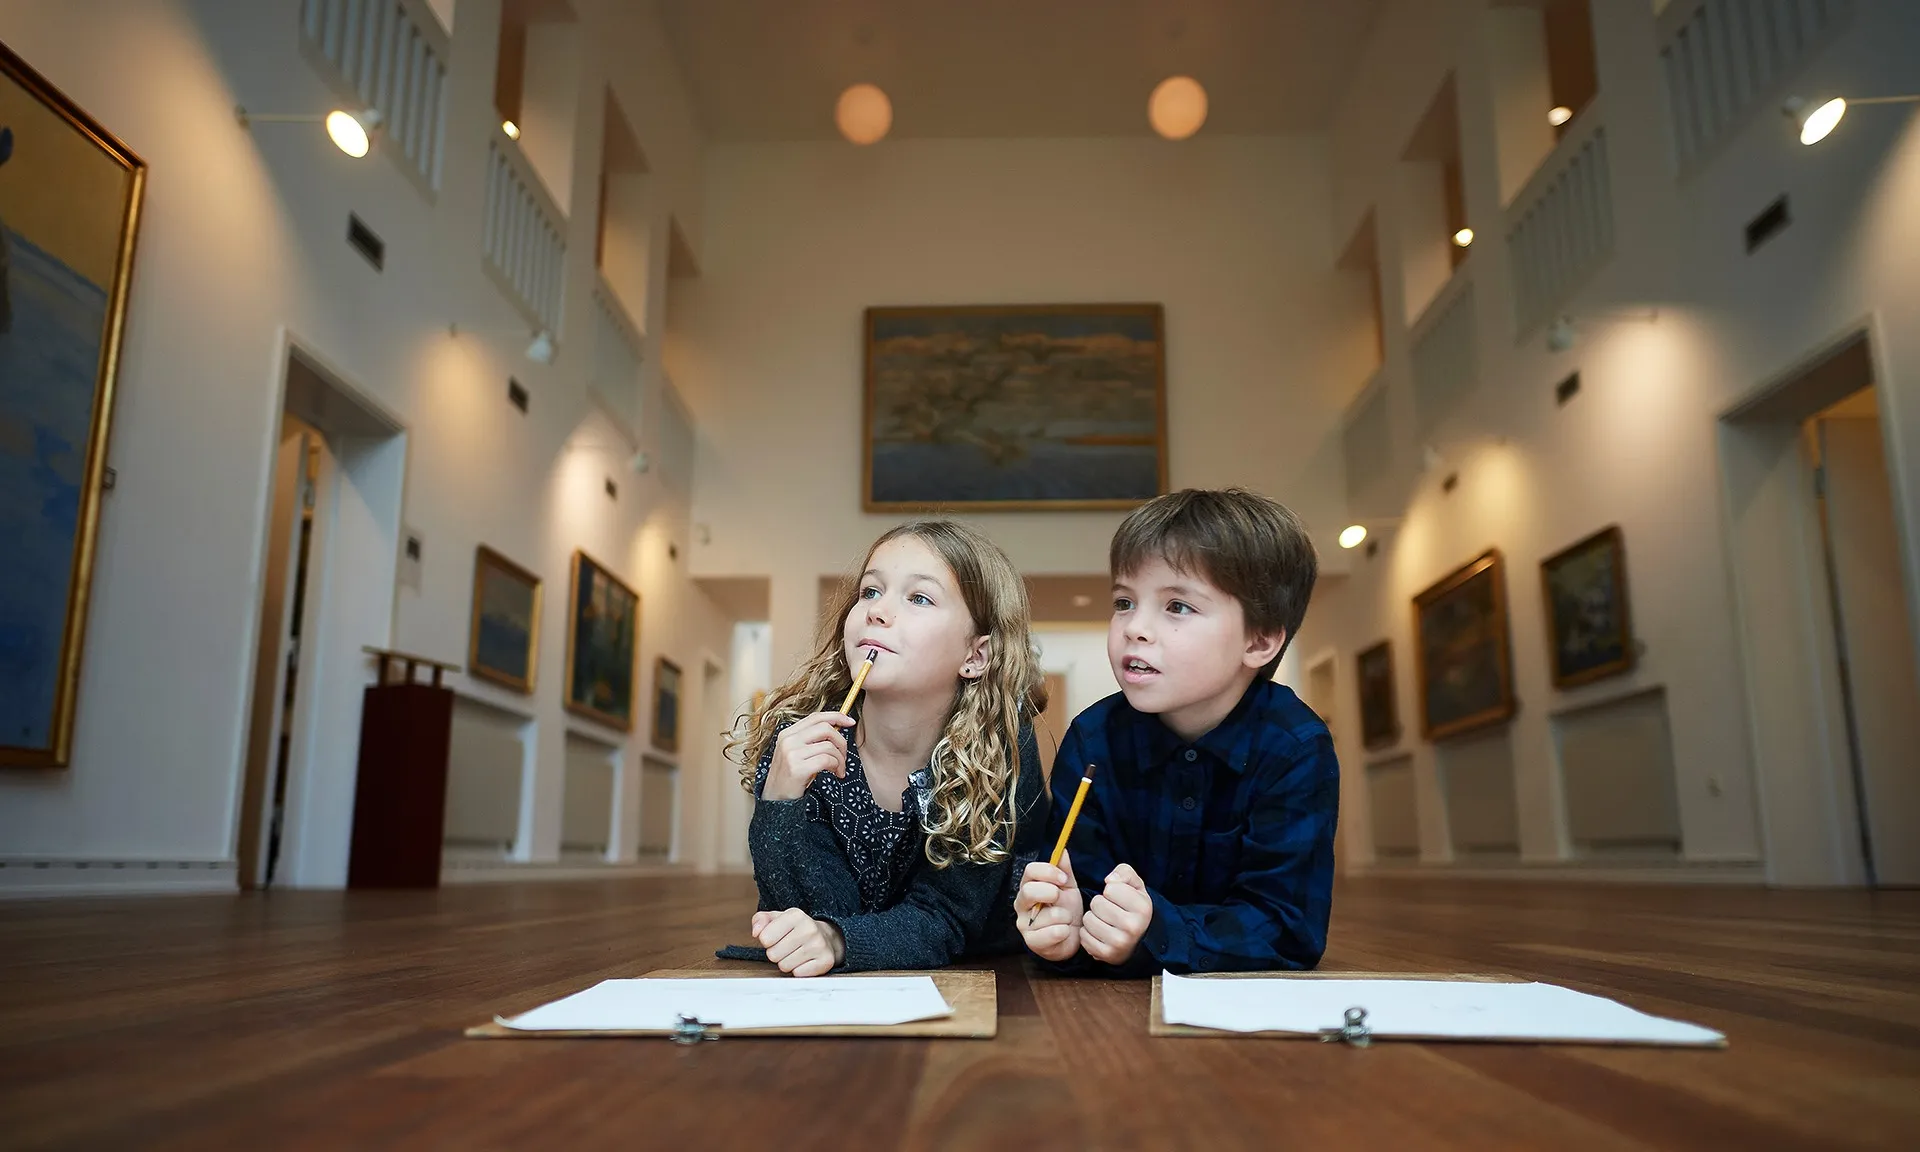 Take your children to the Johannes Larsen Museum and experience the art together